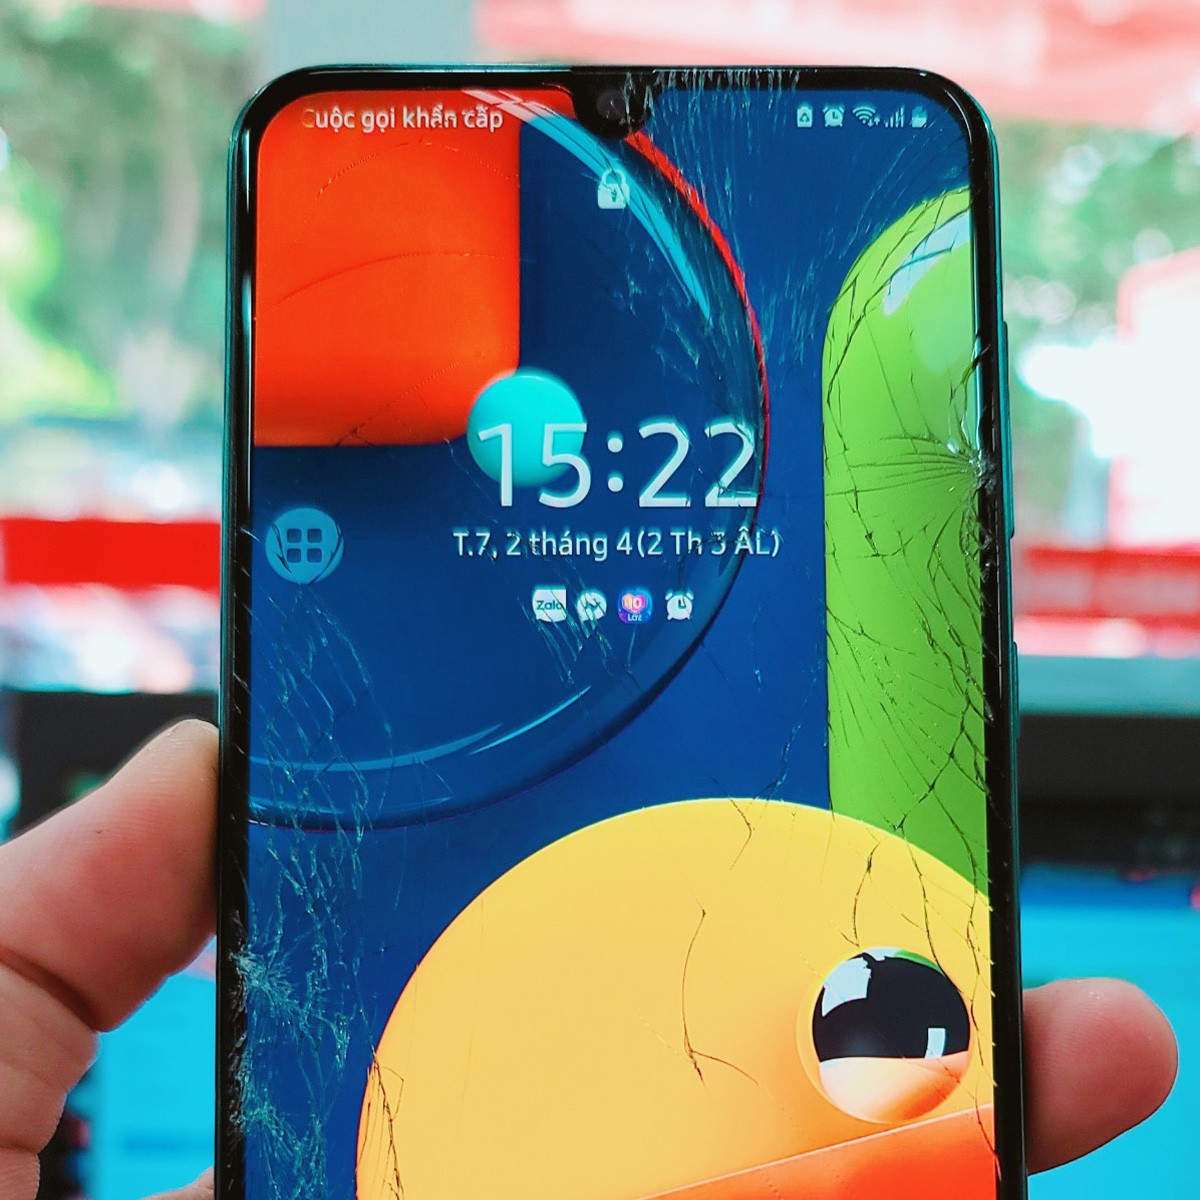 How to Change Wallpaper in SAMSUNG Galaxy A50 - Set Wallpaper - YouTube